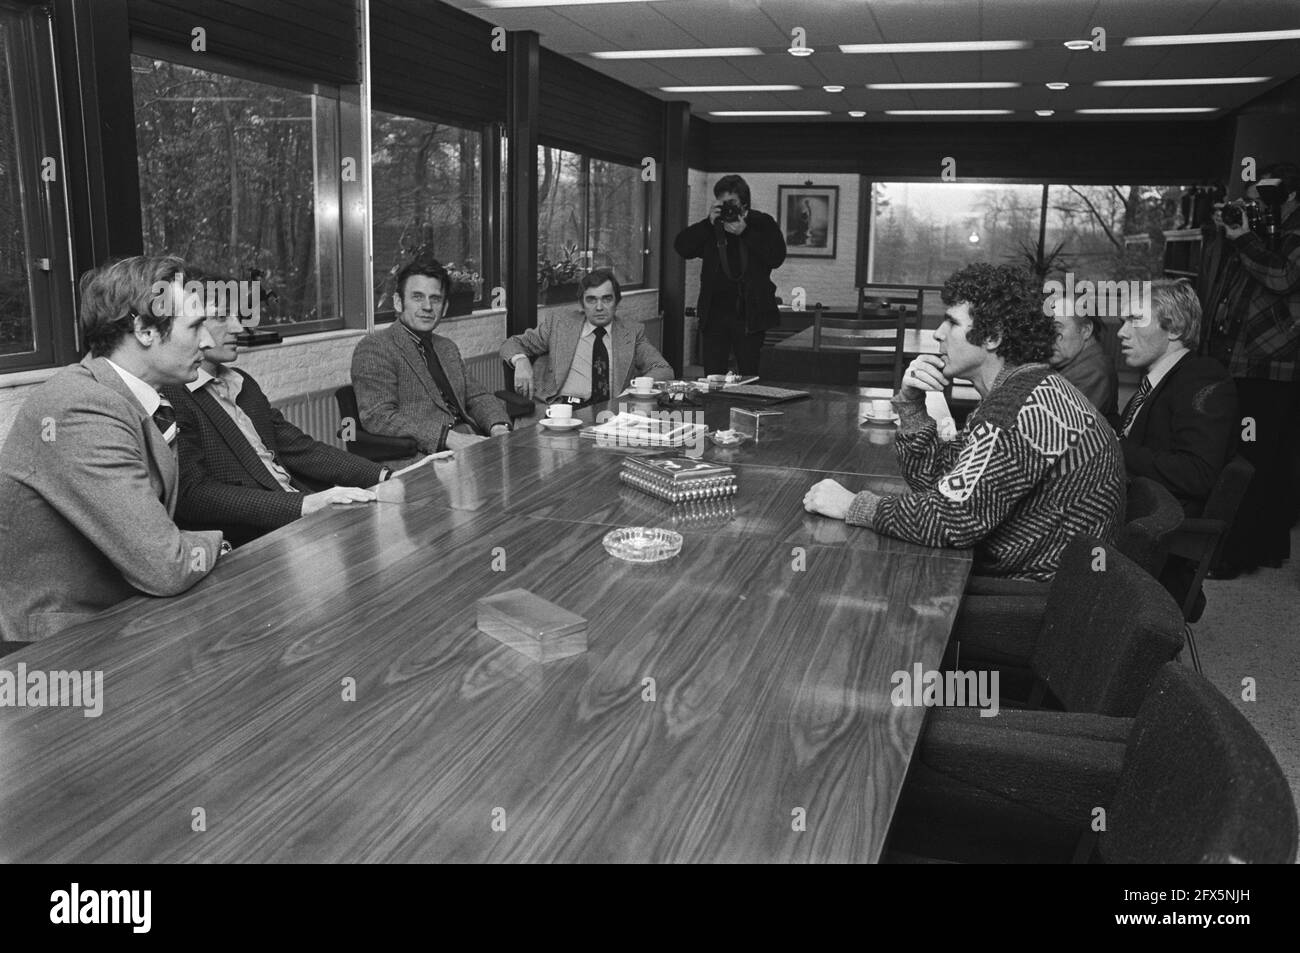 Discussion players, trainers Dutch national team about coaching during World Cup in Argentina; from left to right Van Beveren, Krol, Zwartkruis, Happel, December 12, 1977, CONVERSATIONS, PLAYERS, TRAINERS, teams, sports, soccer, The Netherlands, 20th century press agency photo, news to remember, documentary, historic photography 1945-1990, visual stories, human history of the Twentieth Century, capturing moments in time Stock Photo